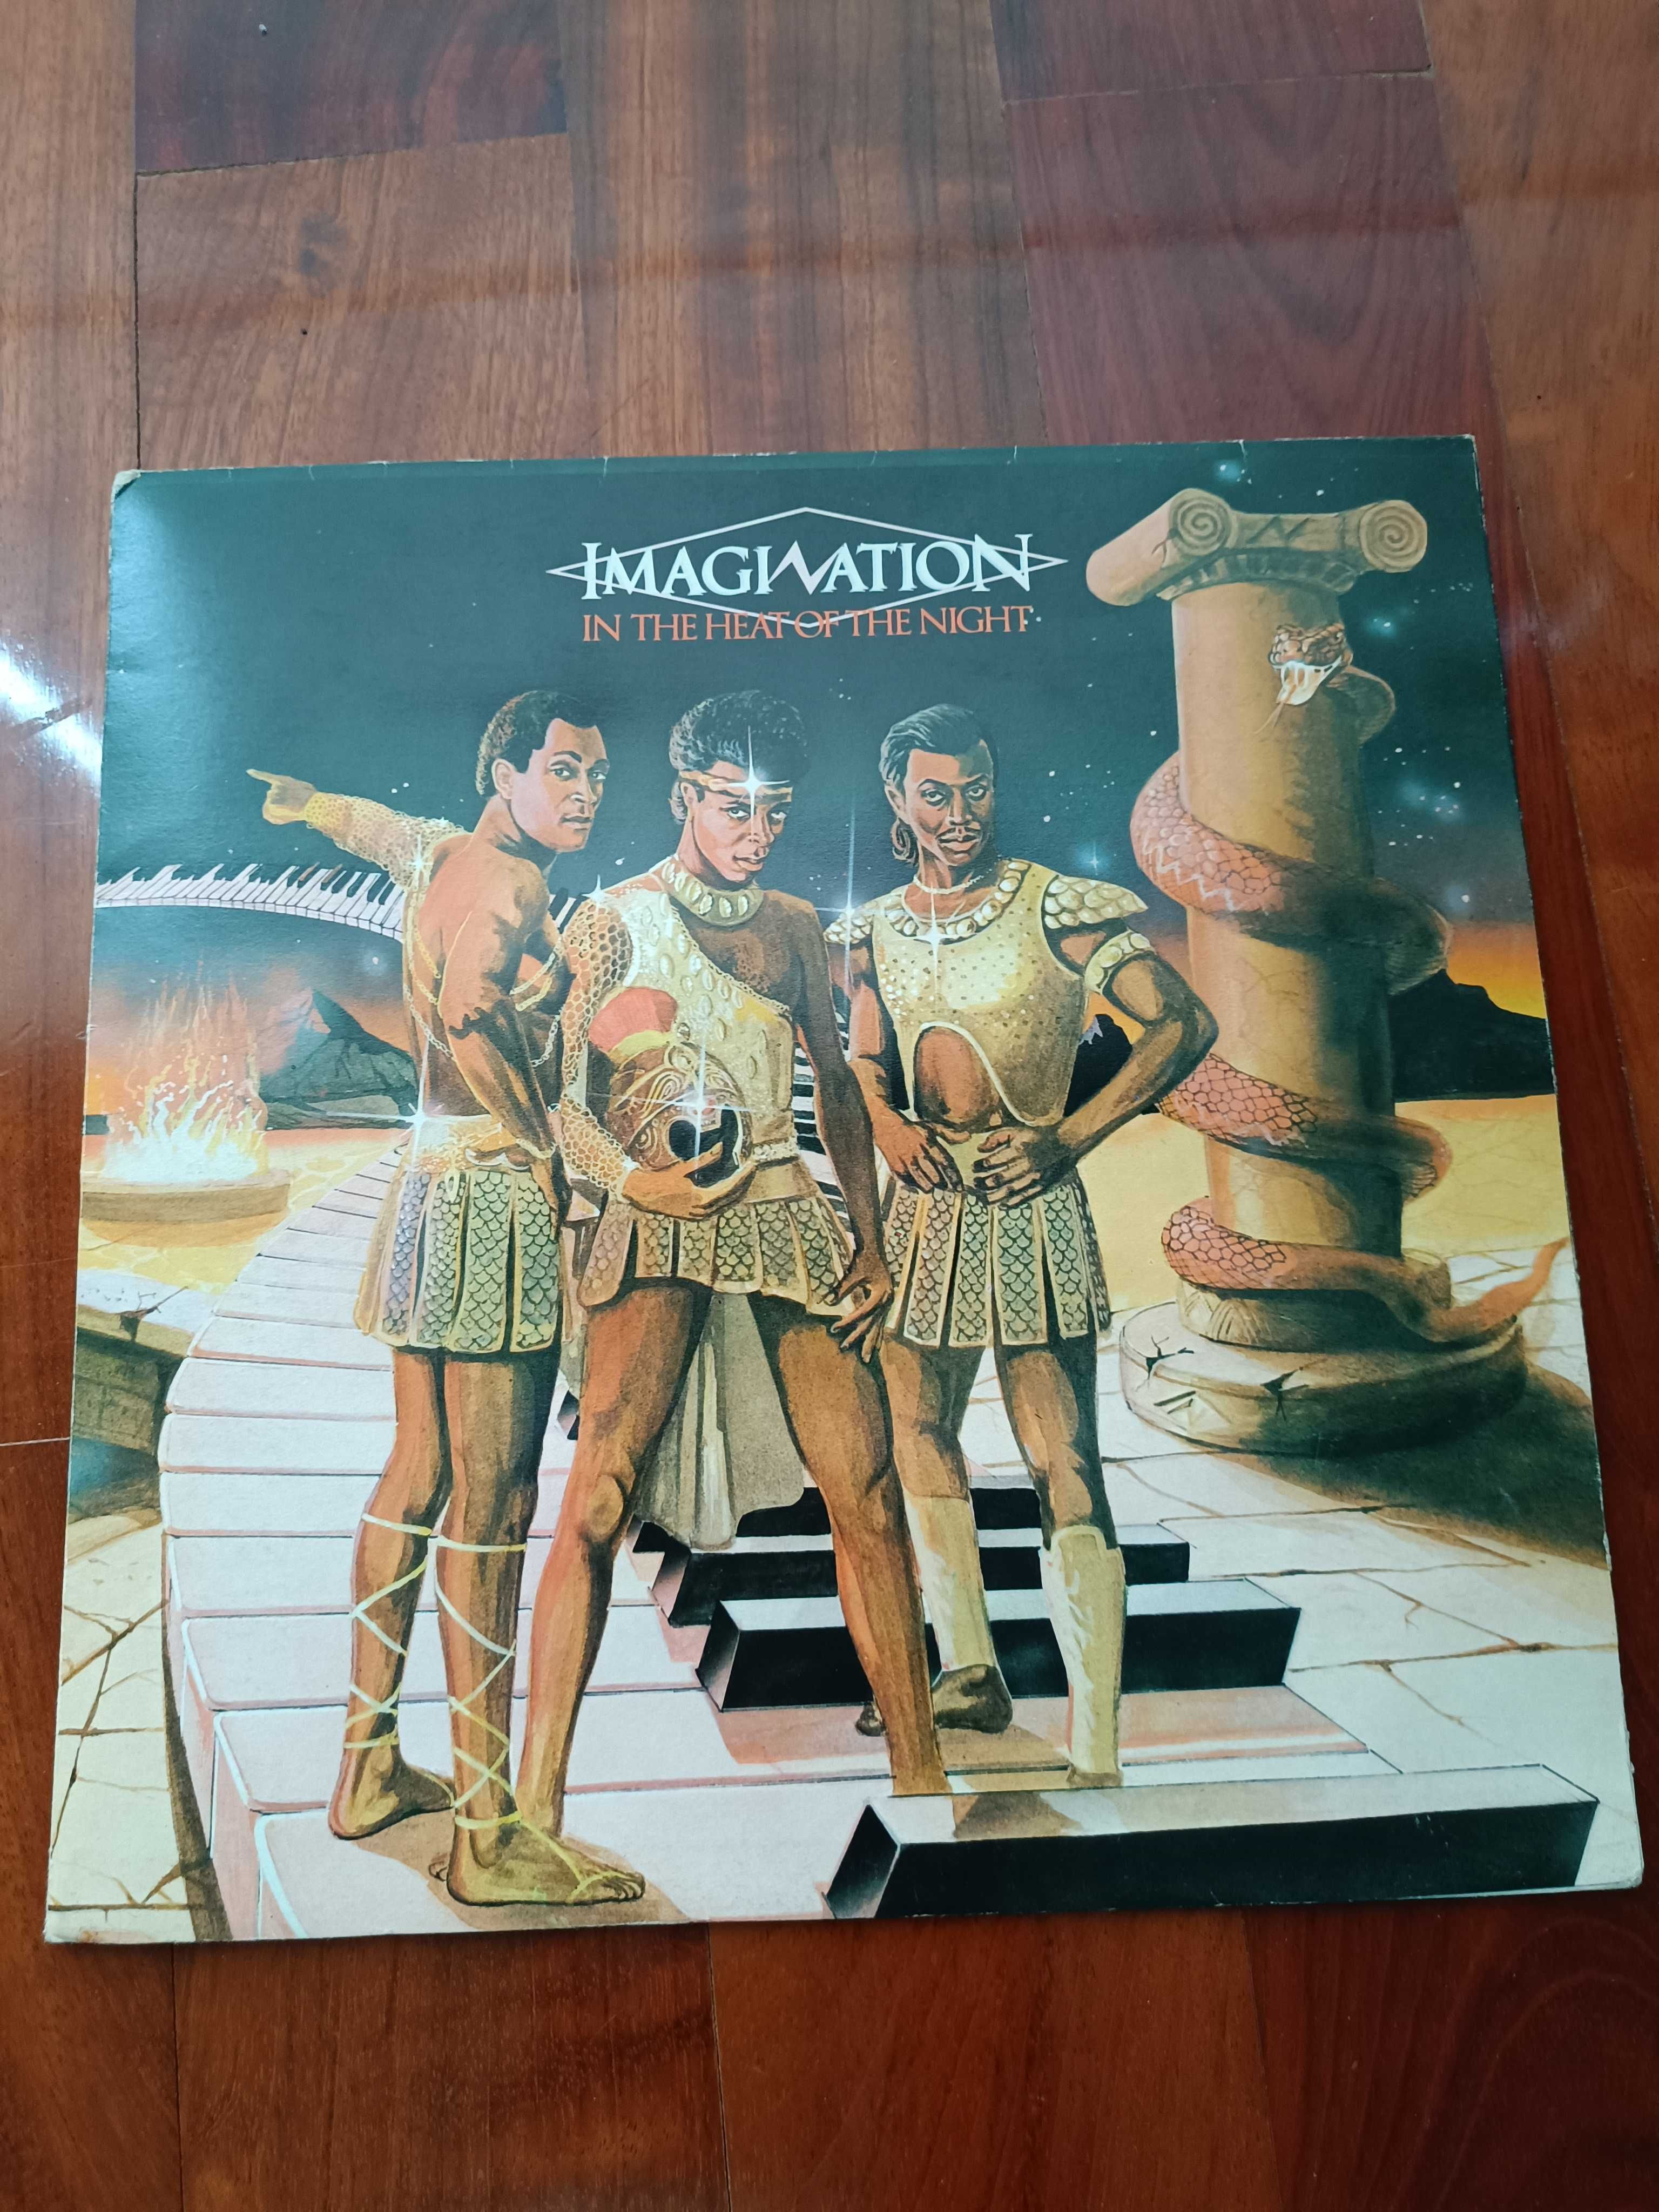 Disco Vinil "Imagination - In The Heart of The Night"